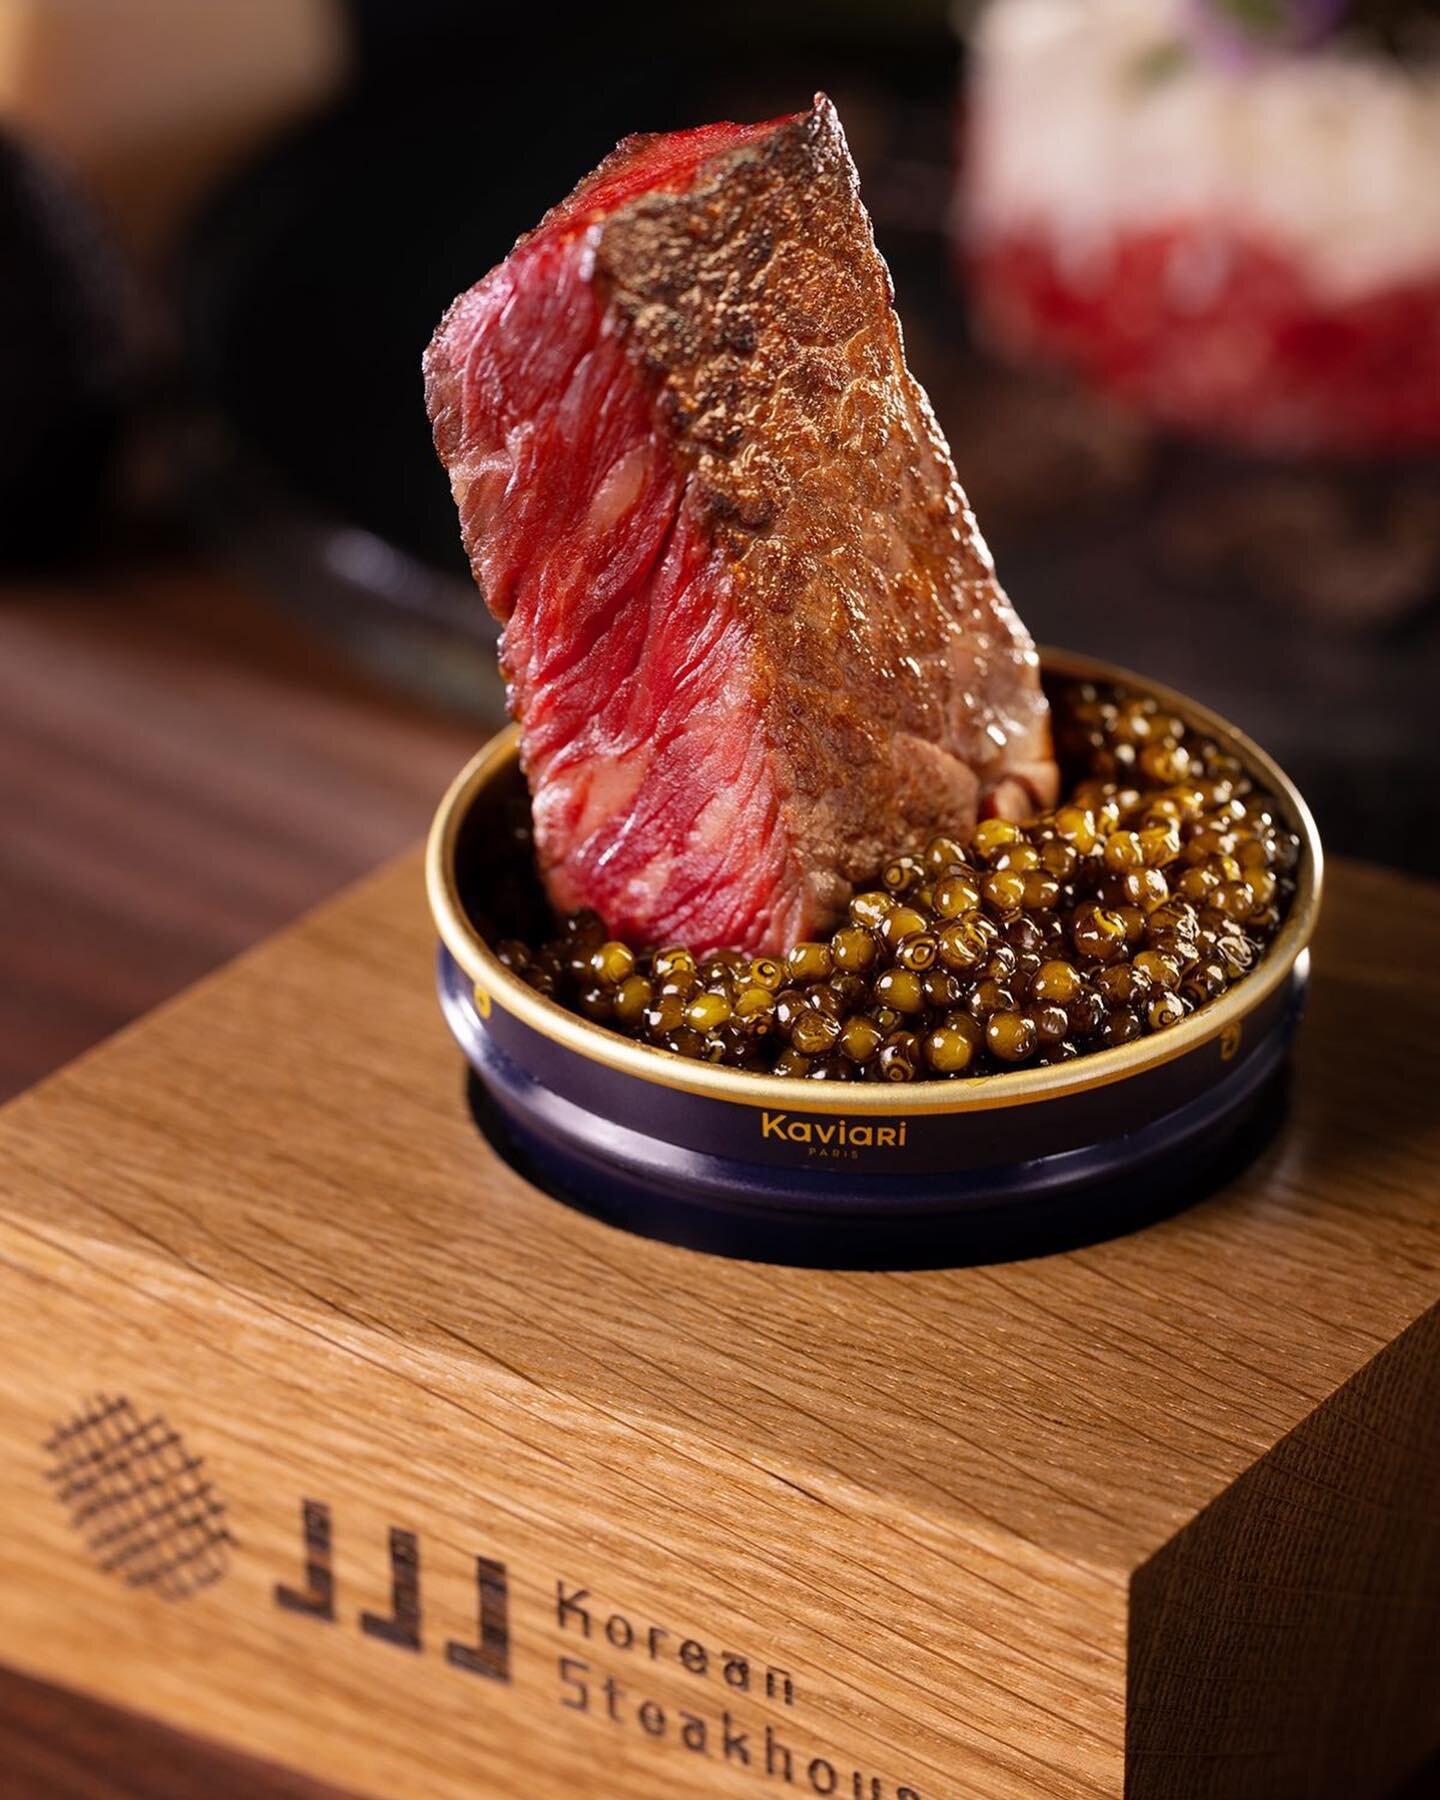 Level up your experience with @kaviari_paris 💫

Caviar with 45-Days Dry Aged Ribeye will definitely get you salivating 😉

Here at JJJ, we serve our valued customers Caviar from Kaviari, a french caviar company that holds 40 years in extracting the 